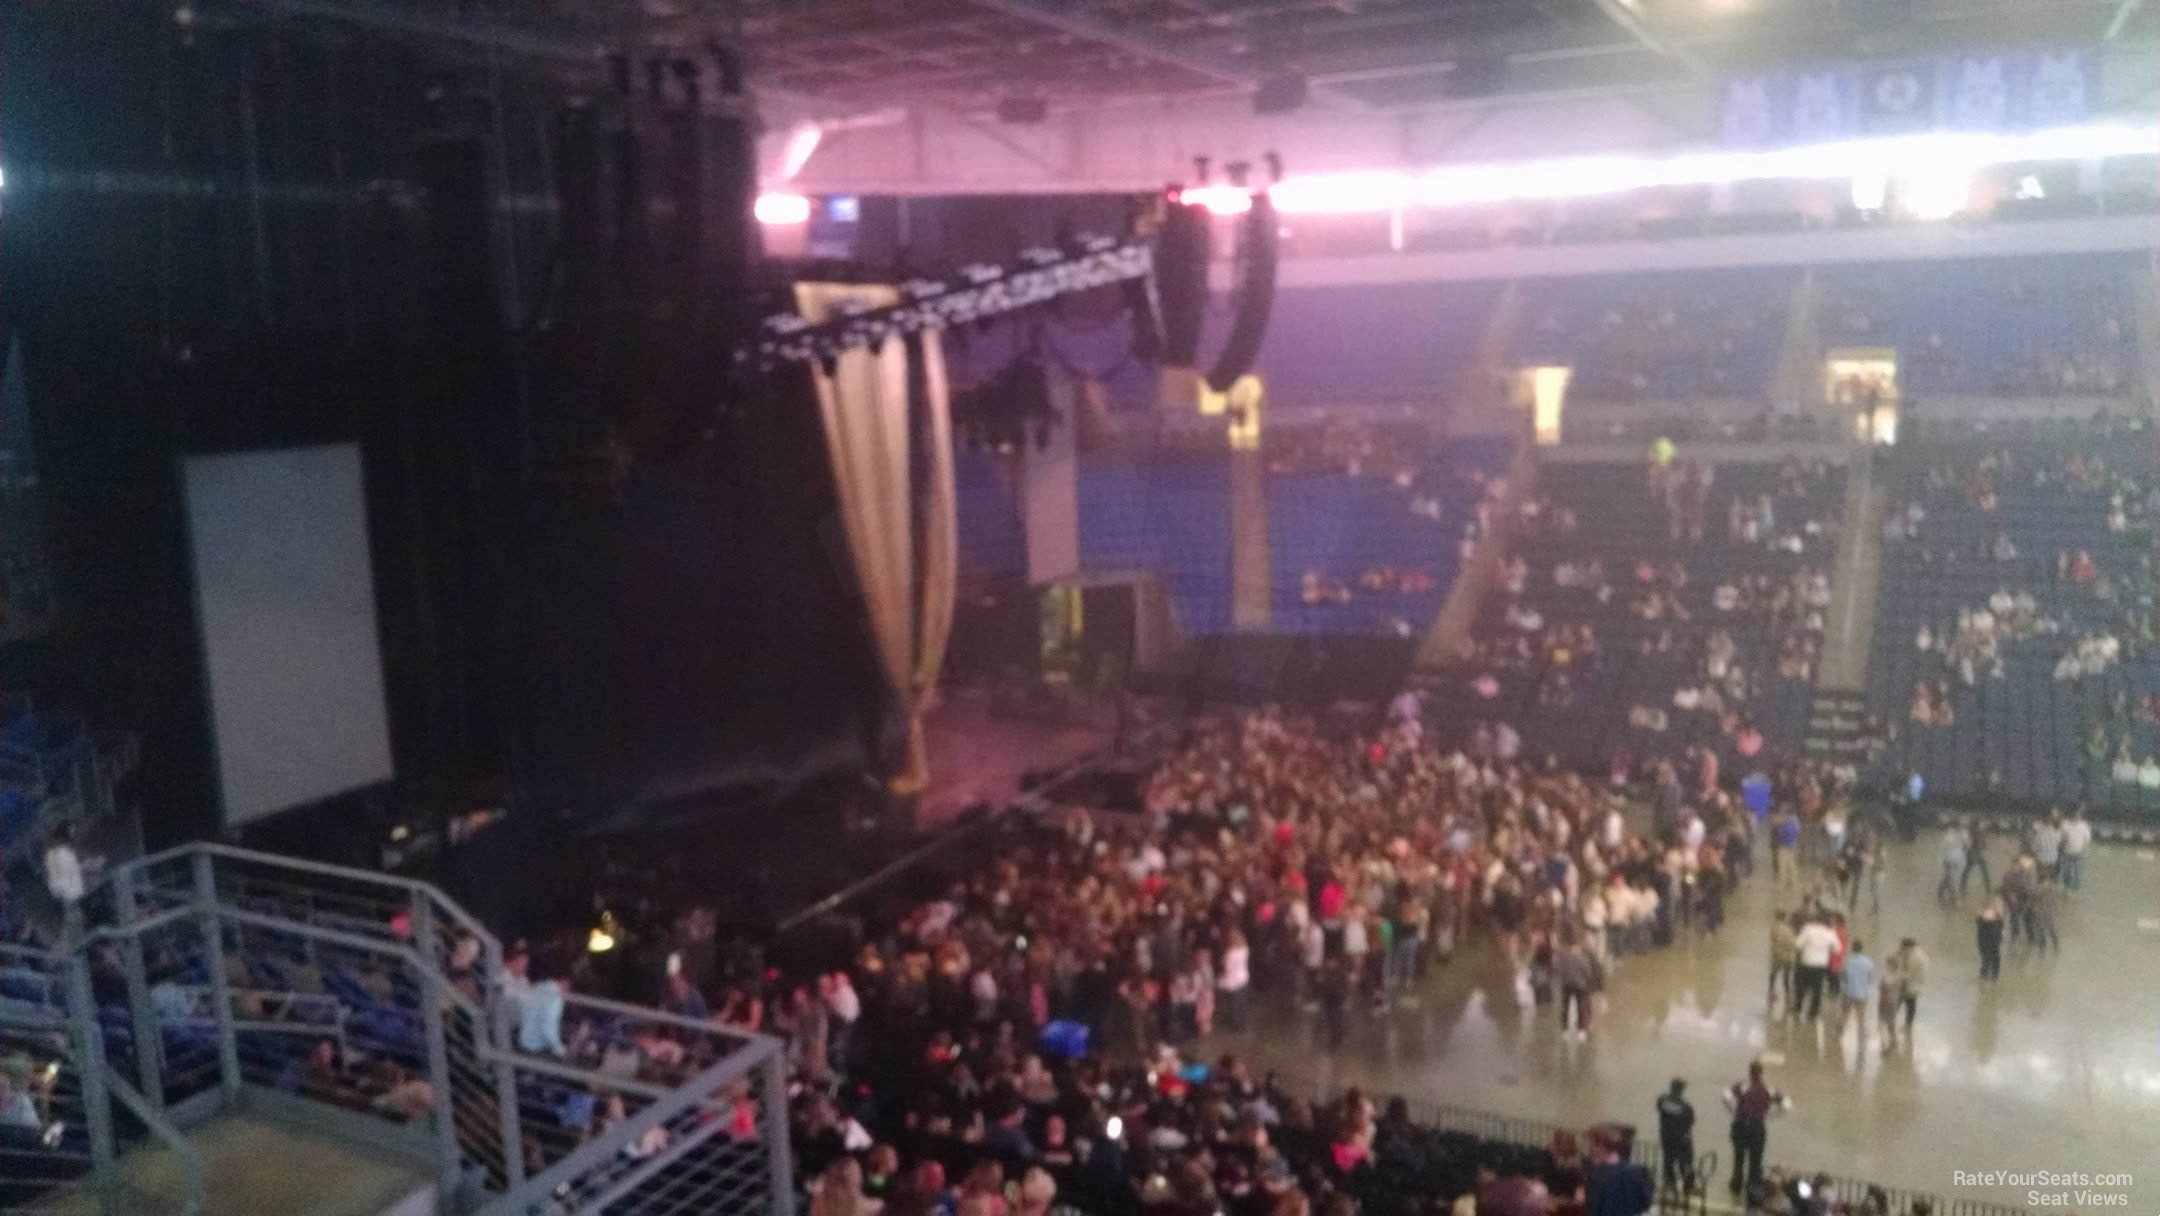 section 214, row d seat view  for concert - chaifetz arena